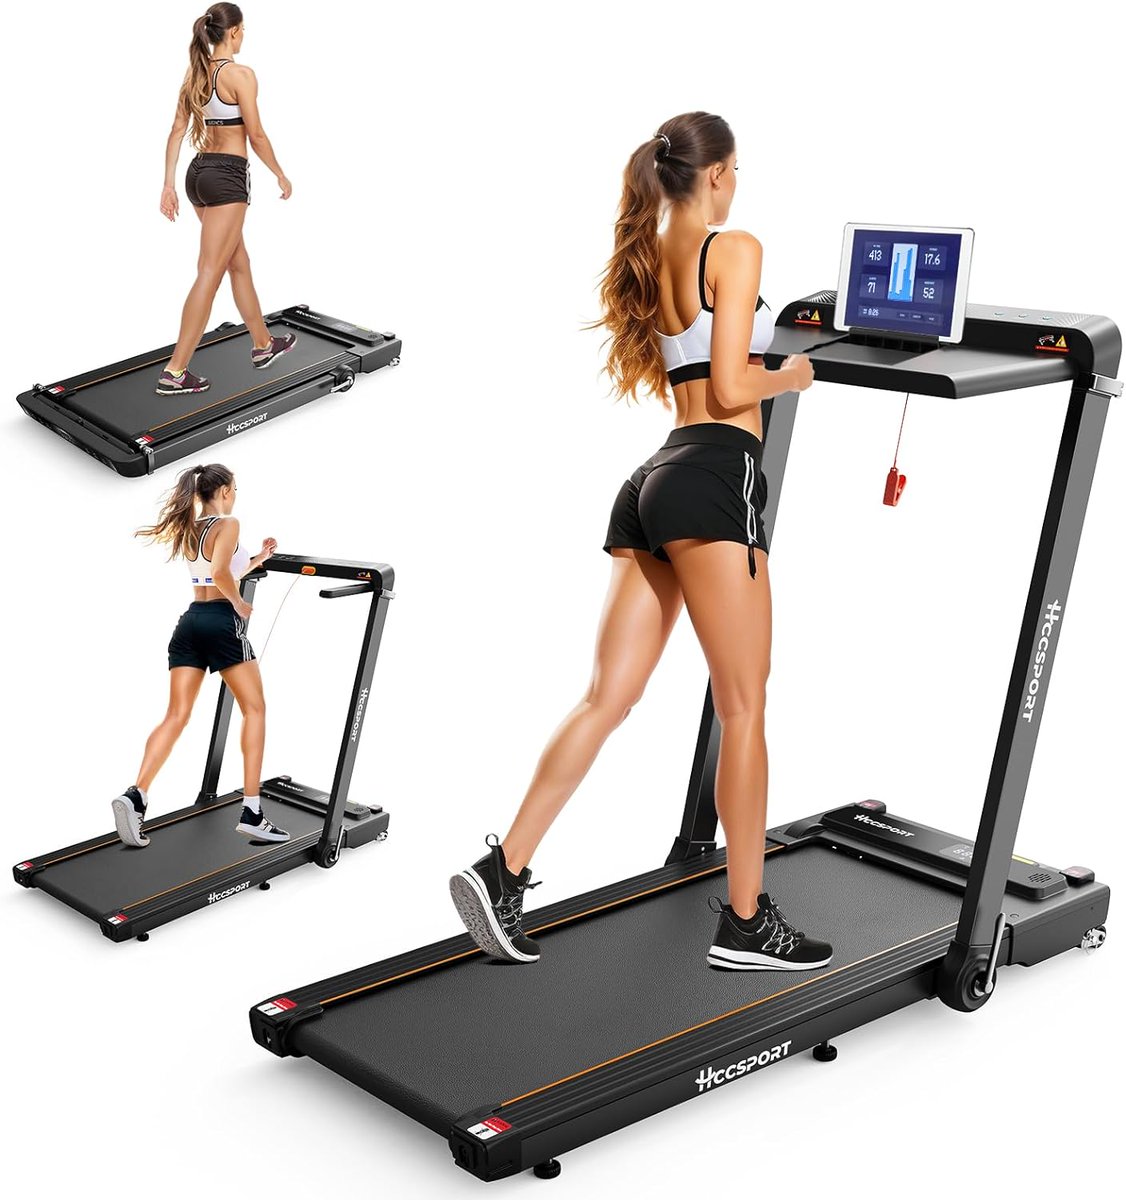 Hccsport Treadmill with Incline, 3 in 1 under desk Treadmill Walking Pad with Removable Desk Workstation 3.5HP... #treadmill #HccsportTreadmillwithIncline #FoldingTreadmill #RunningMachine #HccsportTreadmill #Hccsport #3in1underdeskTreadmill pinterest.com/pin/5956714882…